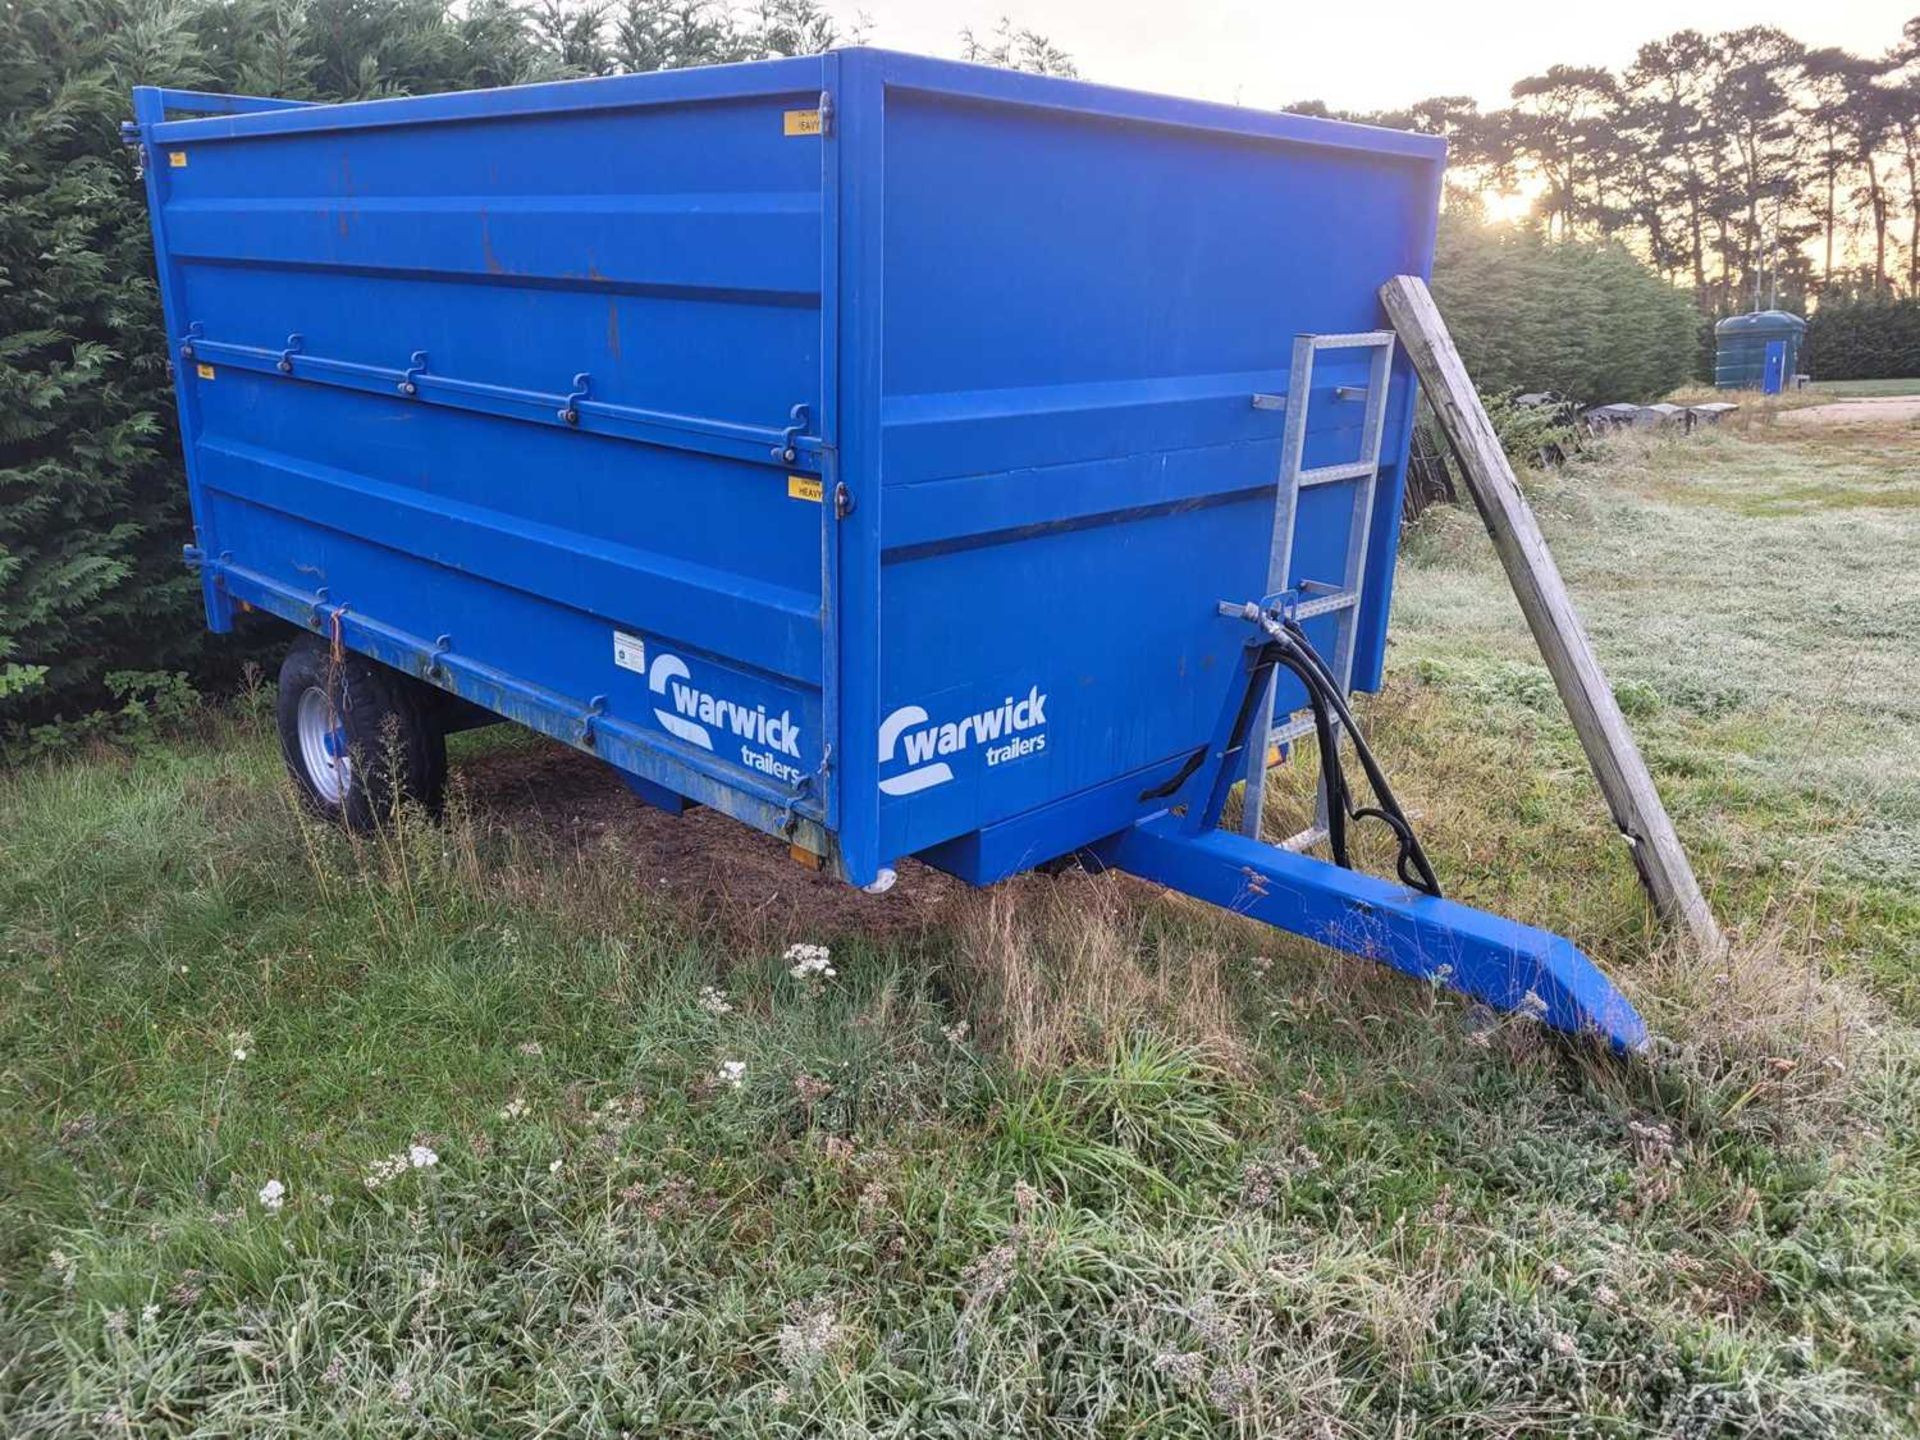 6t Warwick tipping trailer, manufactured in 2017, single drop side with twin barn style rear - Bild 5 aus 8